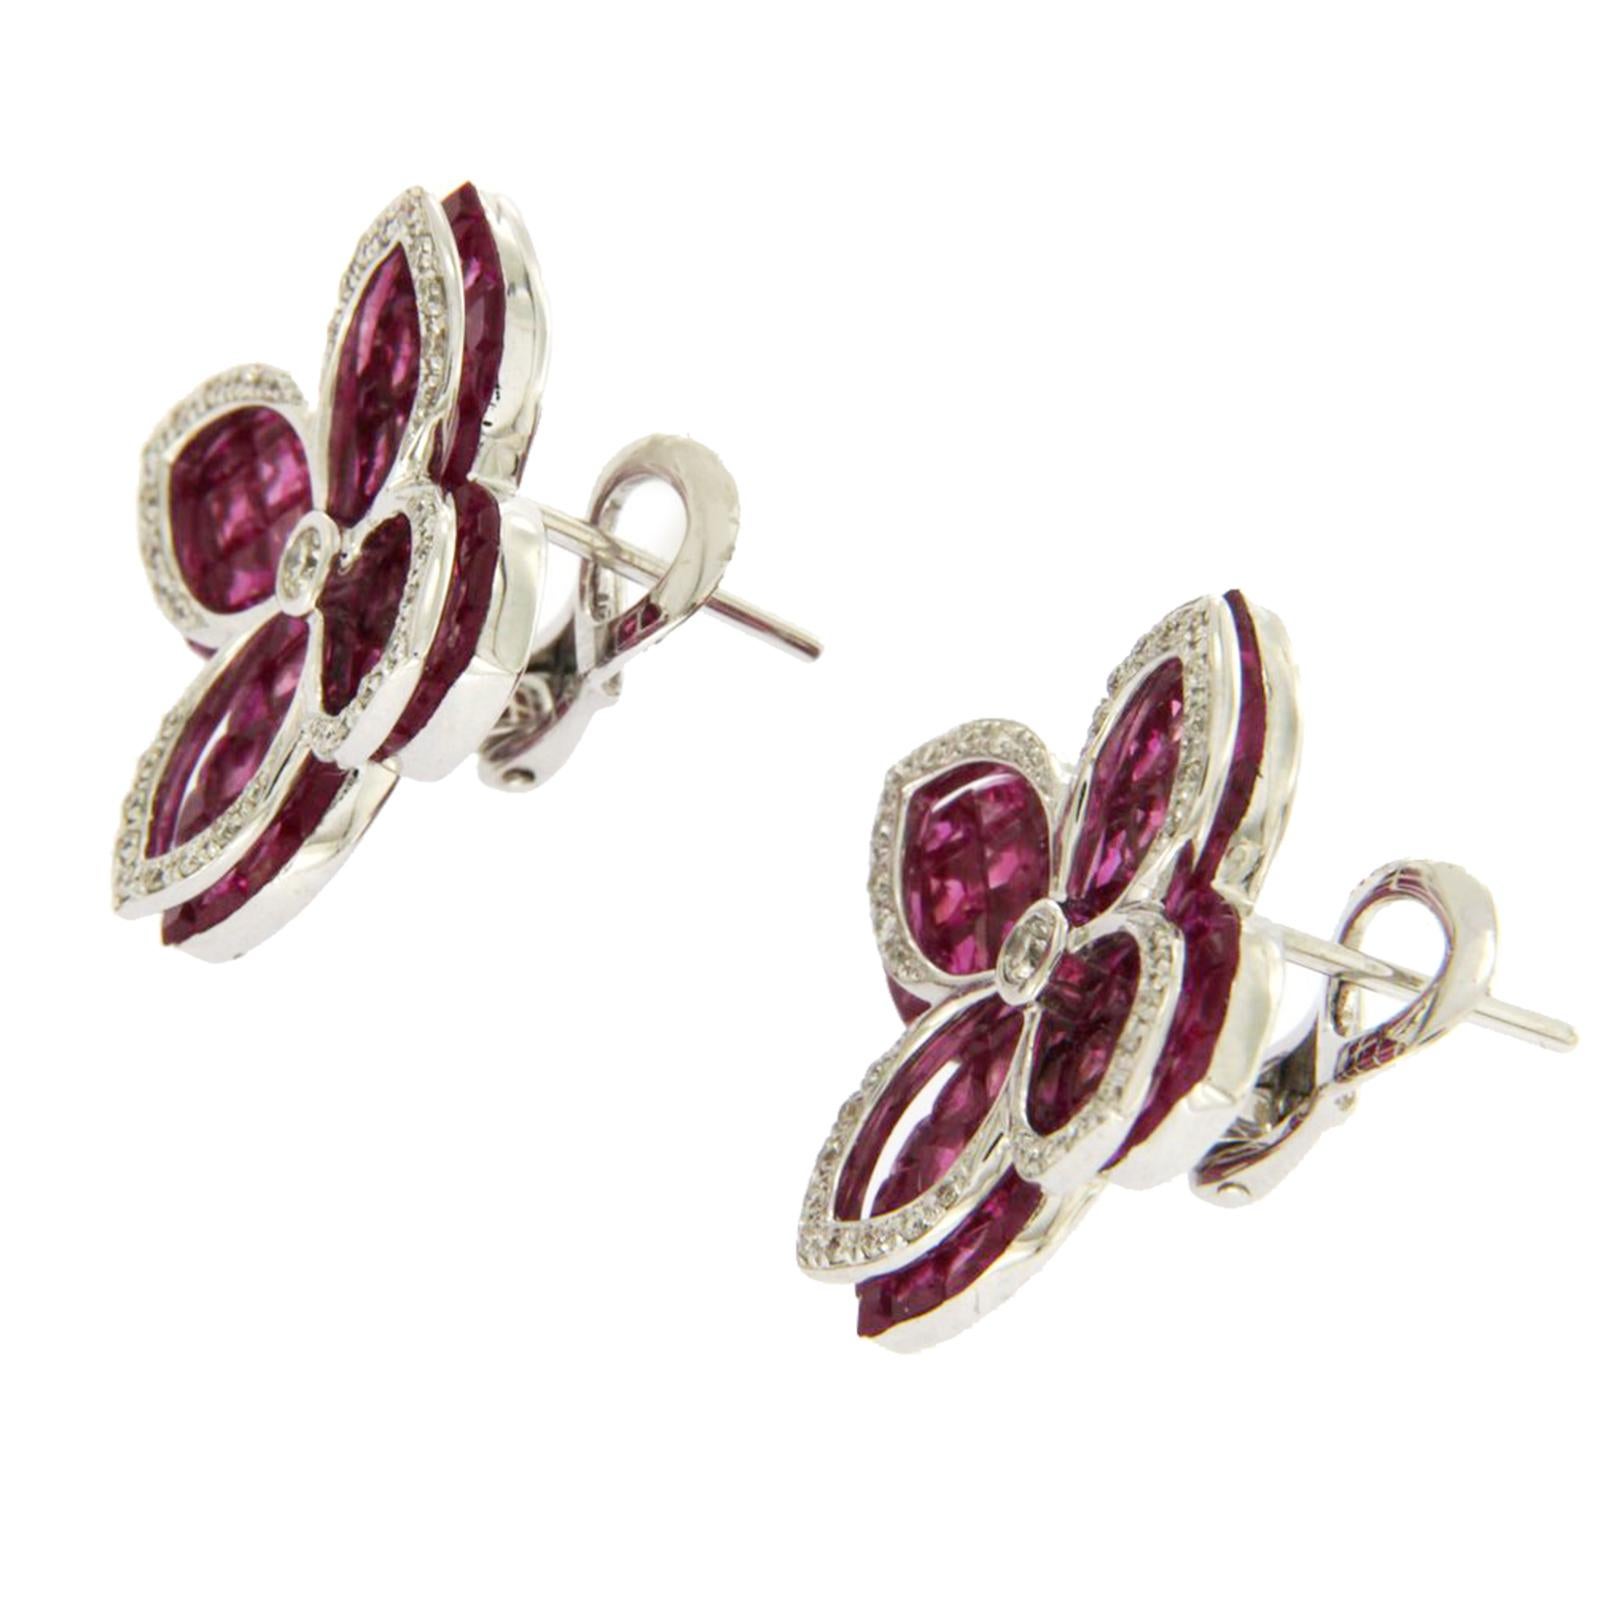 18 Karat White Gold 0.32 Carat Diamonds and Invisible 9.86 Carat Ruby Earrings For Sale 2